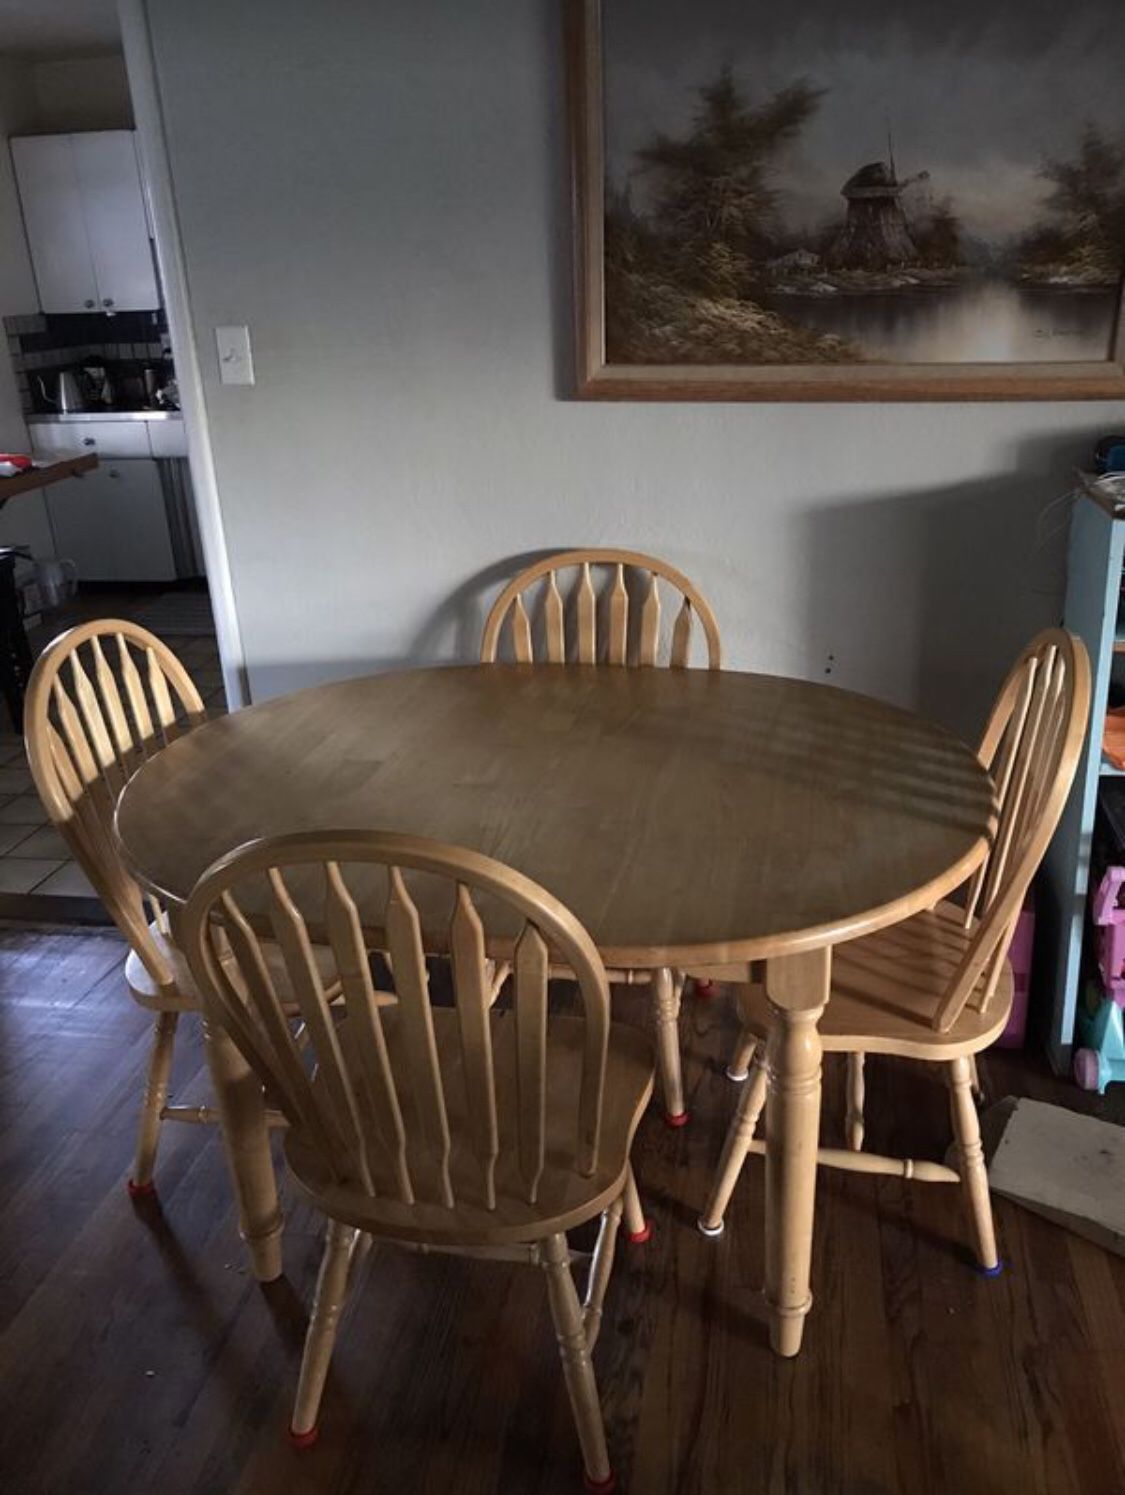 NICE OAK TABLE WITH 4 CHAIRS